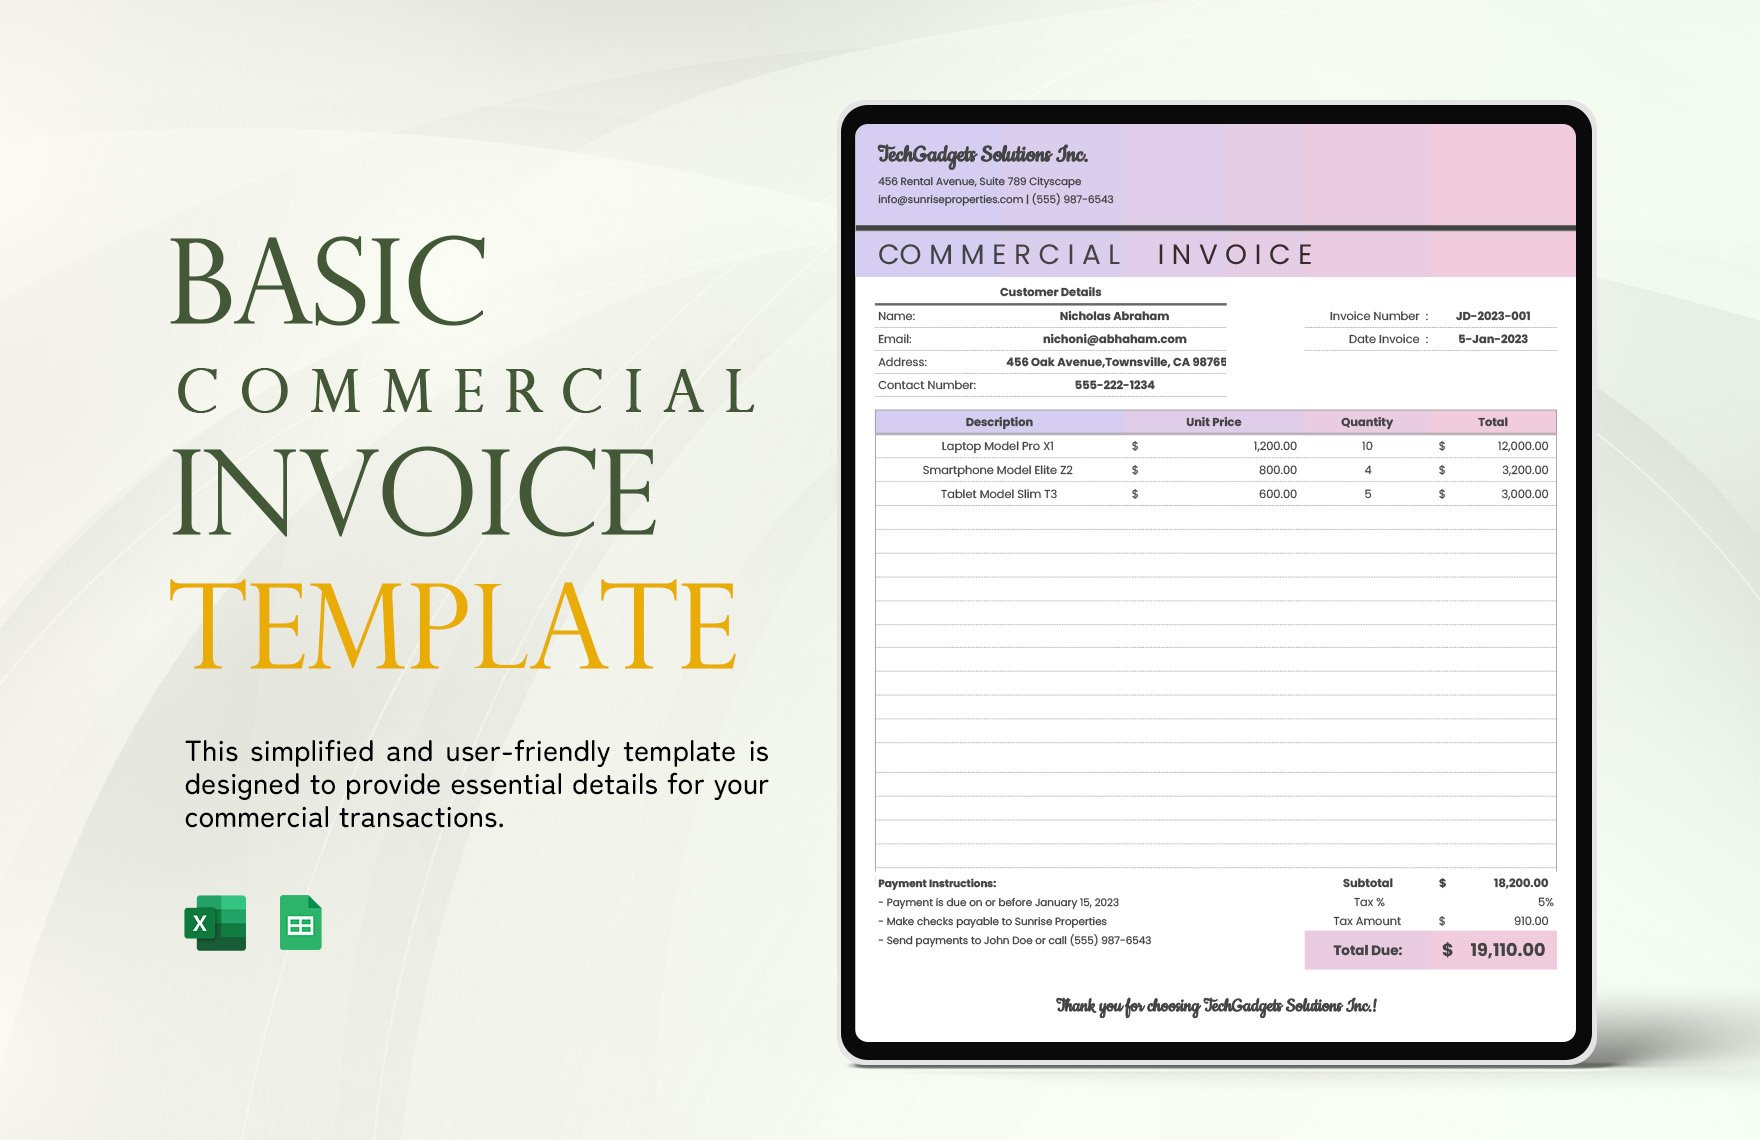 Free Basic Commercial Invoice Template in Excel, Google Sheets